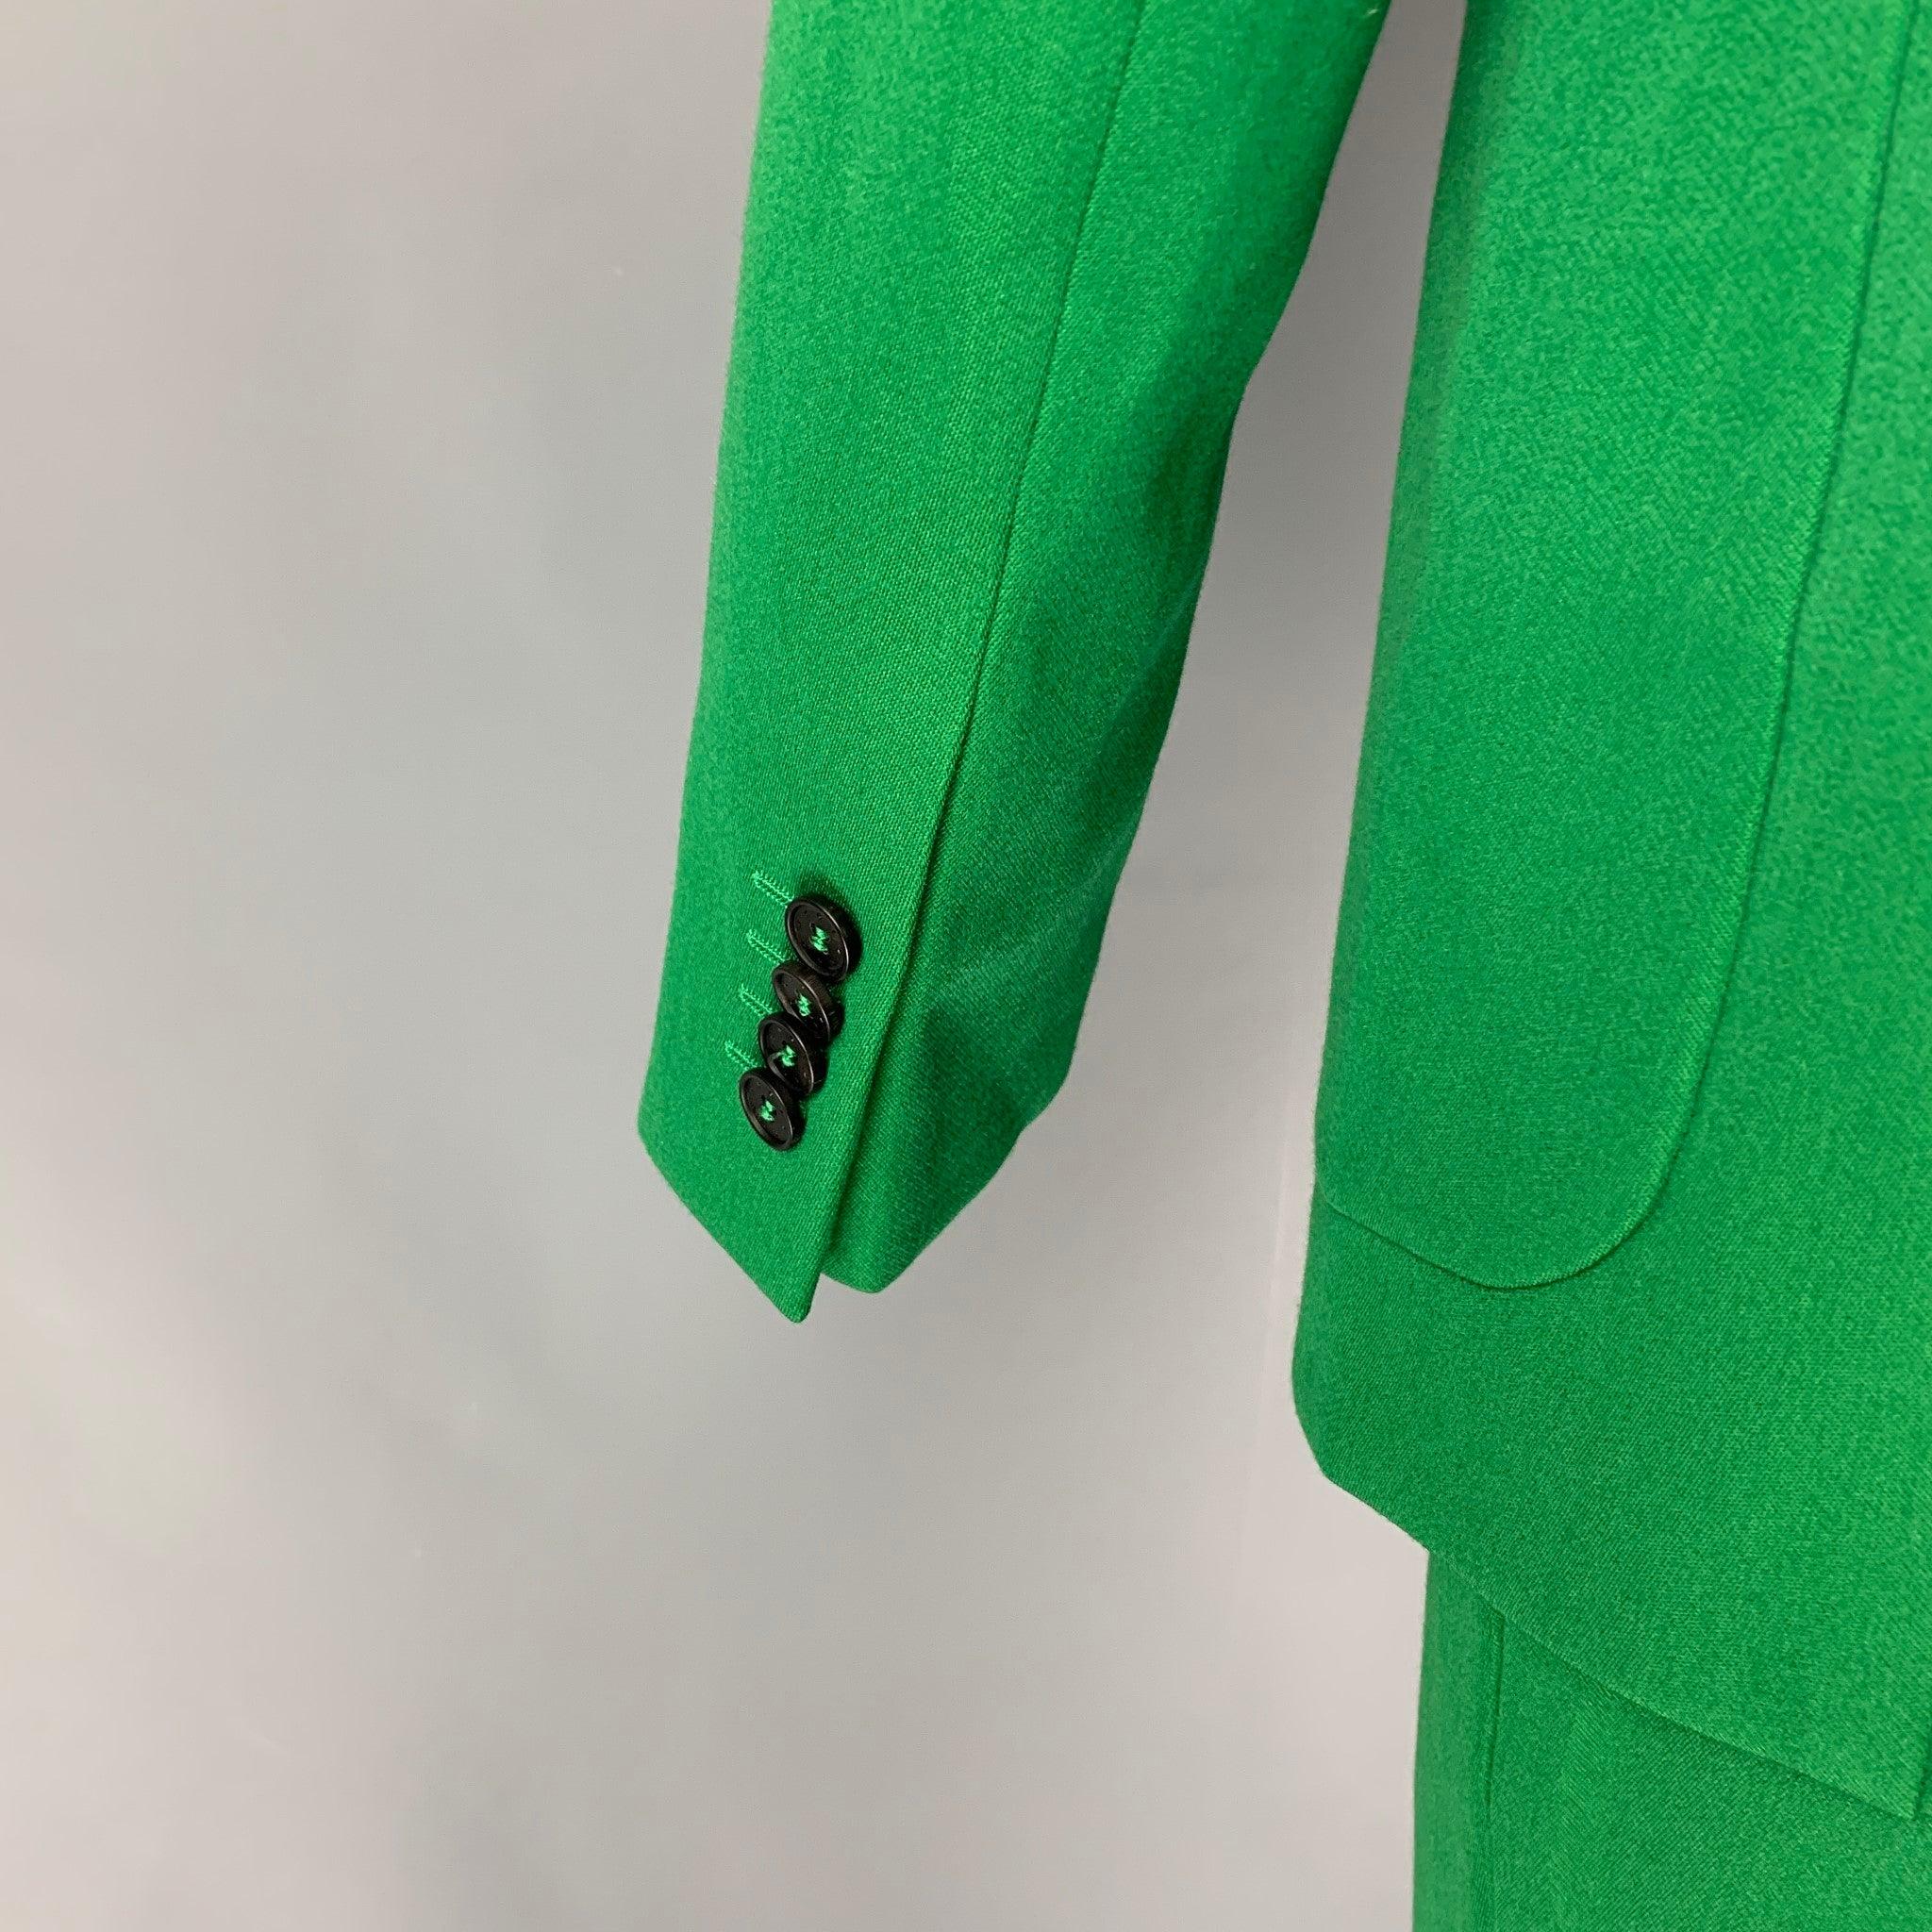  GIVENCHY Pre-Spring 2020 Taille 38 Costume double boutonnage en laine polyester verte Pour hommes 